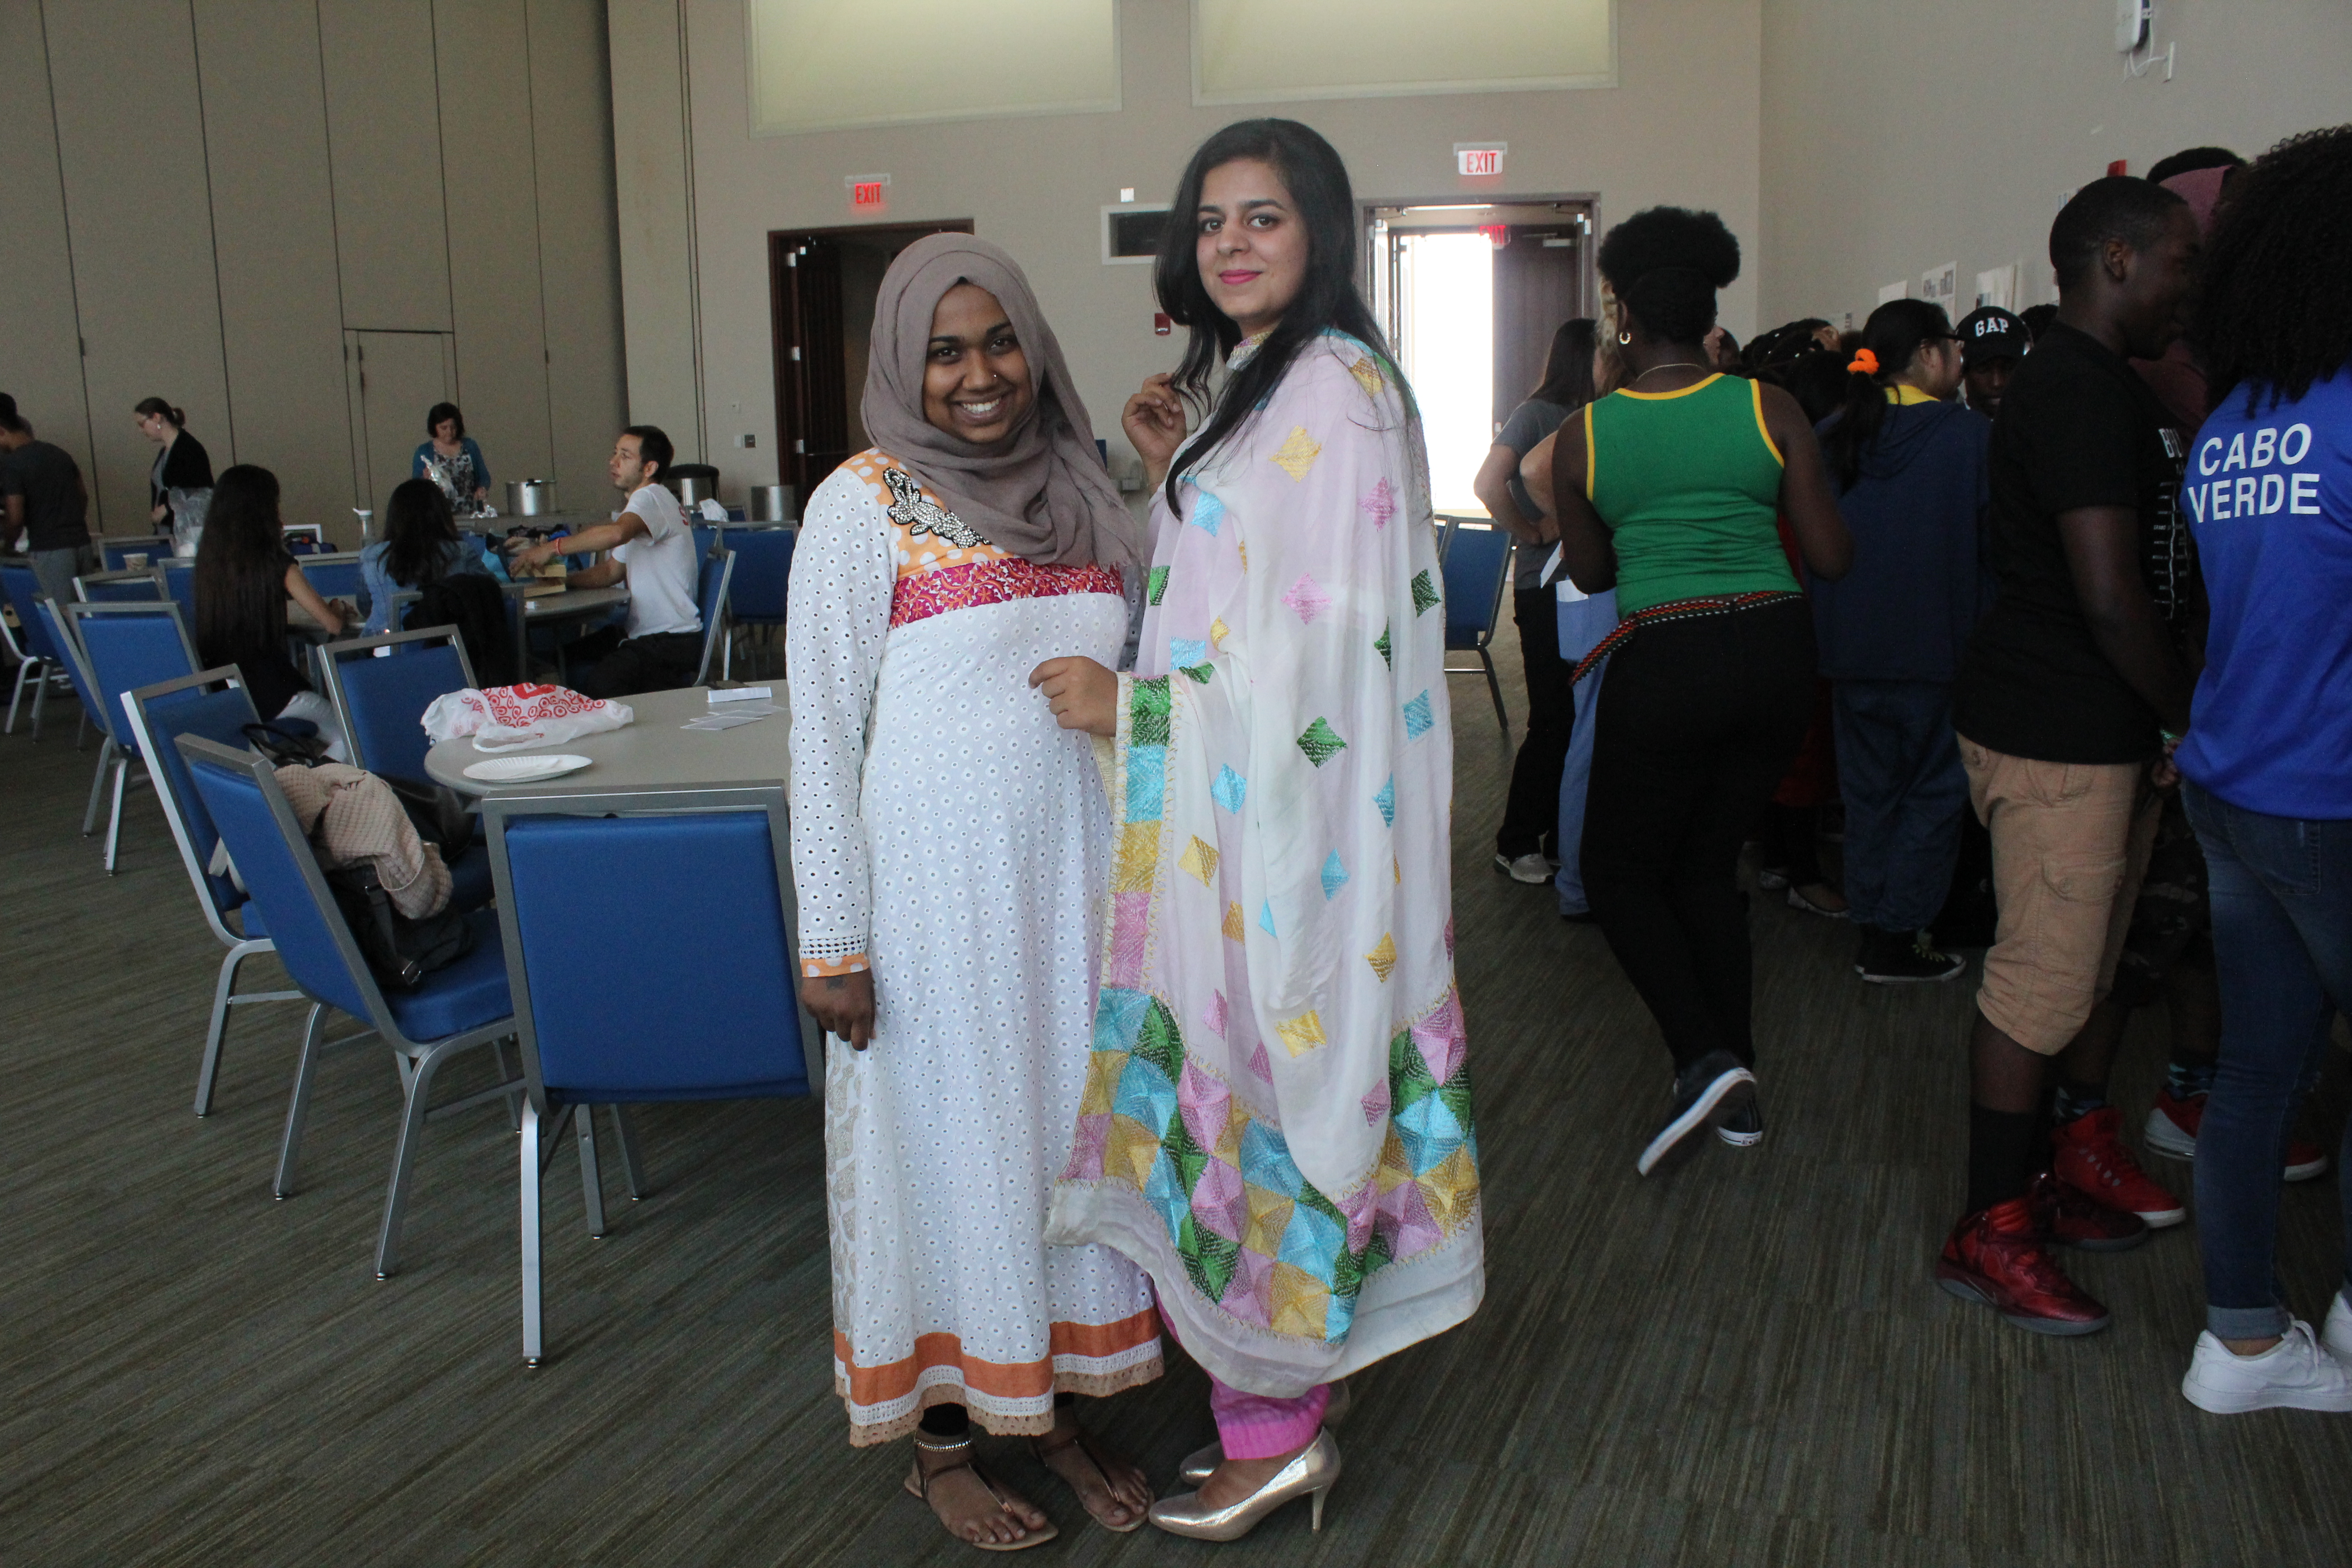 These two staff members came to the event wearing their tradition gown!